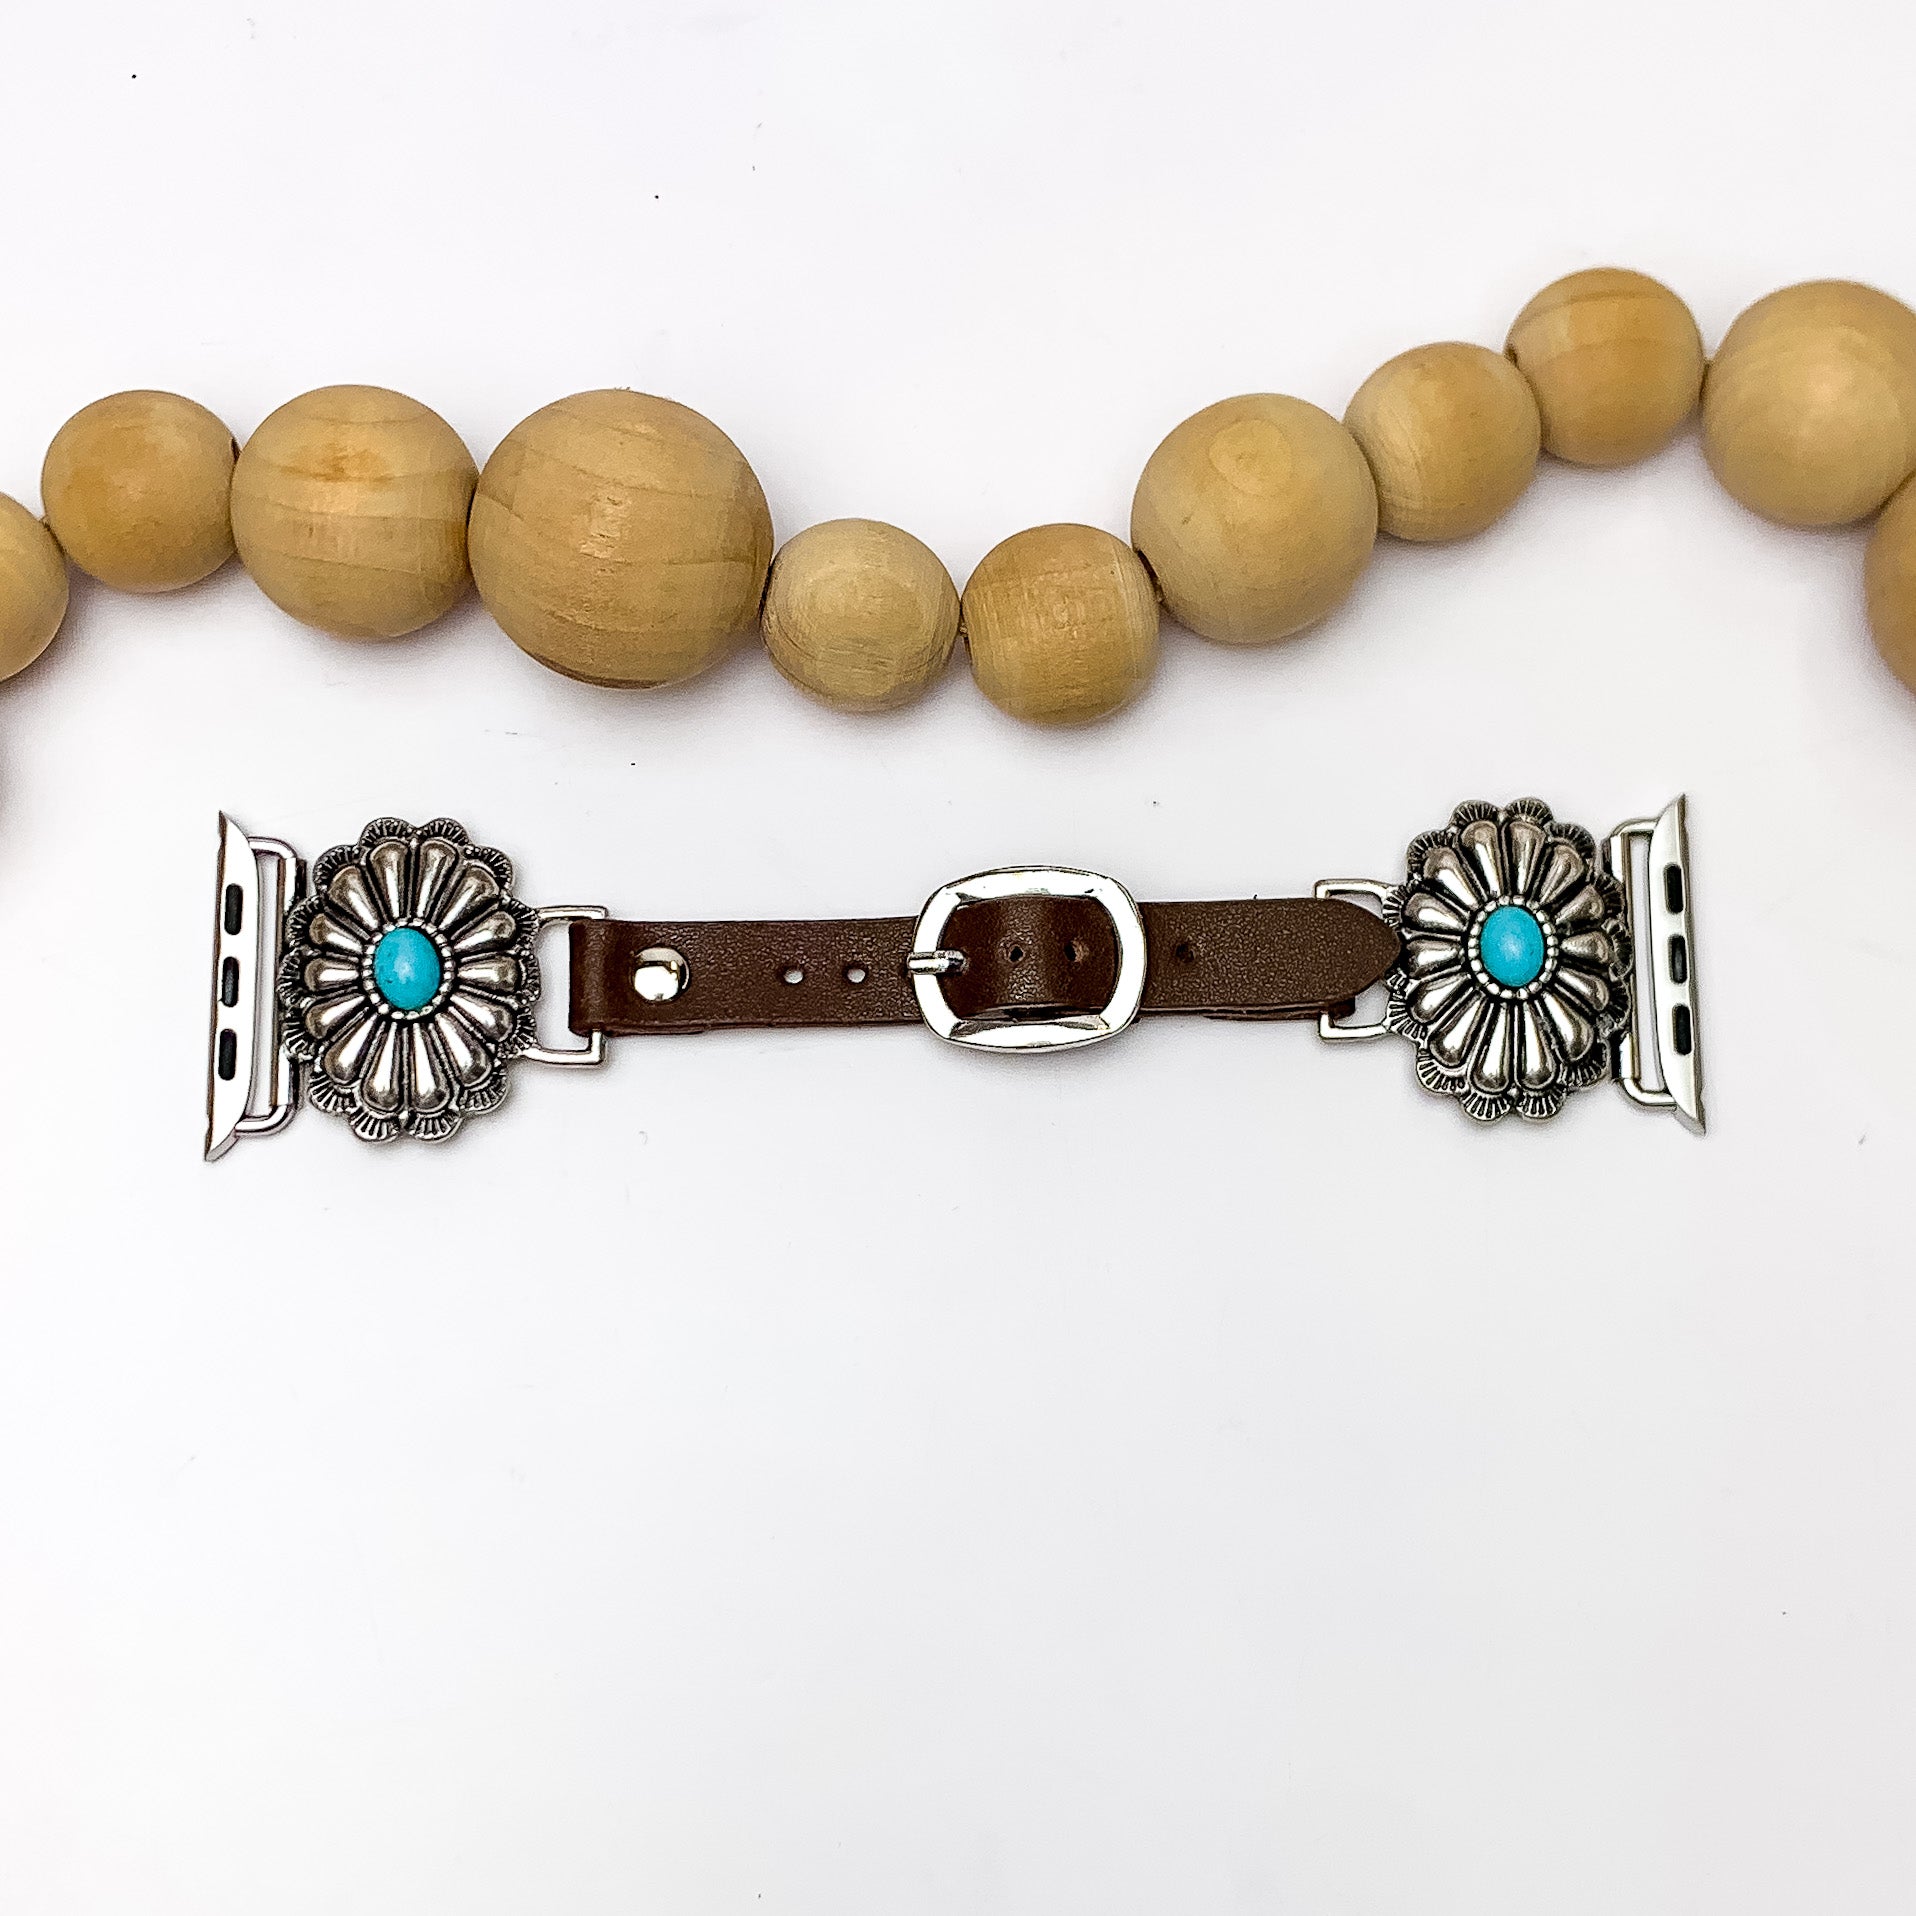 Brown Watch Band with Oval Silver Tone Design and Turquoise Stone. Pictured on a white background with wood beads above the watch for decoration.